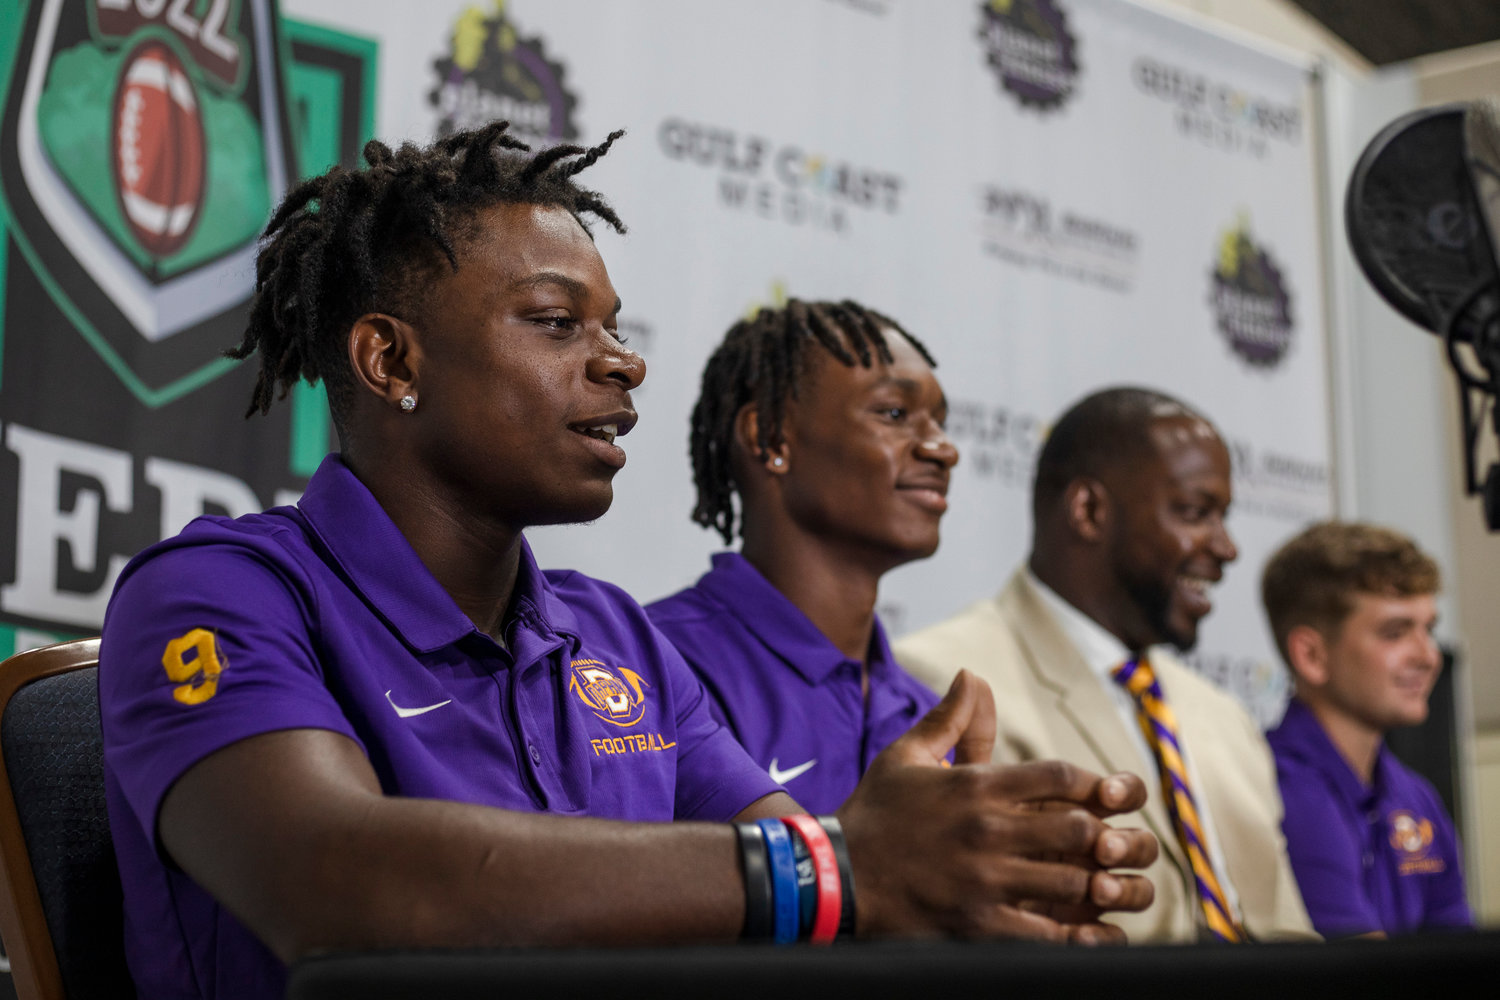 The Daphne Trojans were represented by Cameron Long, Stephon Blackshear, head coach Kenny King and Gabe Reynolds at the first-ever Gulf Coast Media Day at The Wharf Aug. 16. Daphne hosts Davidson in a key region game this Friday.